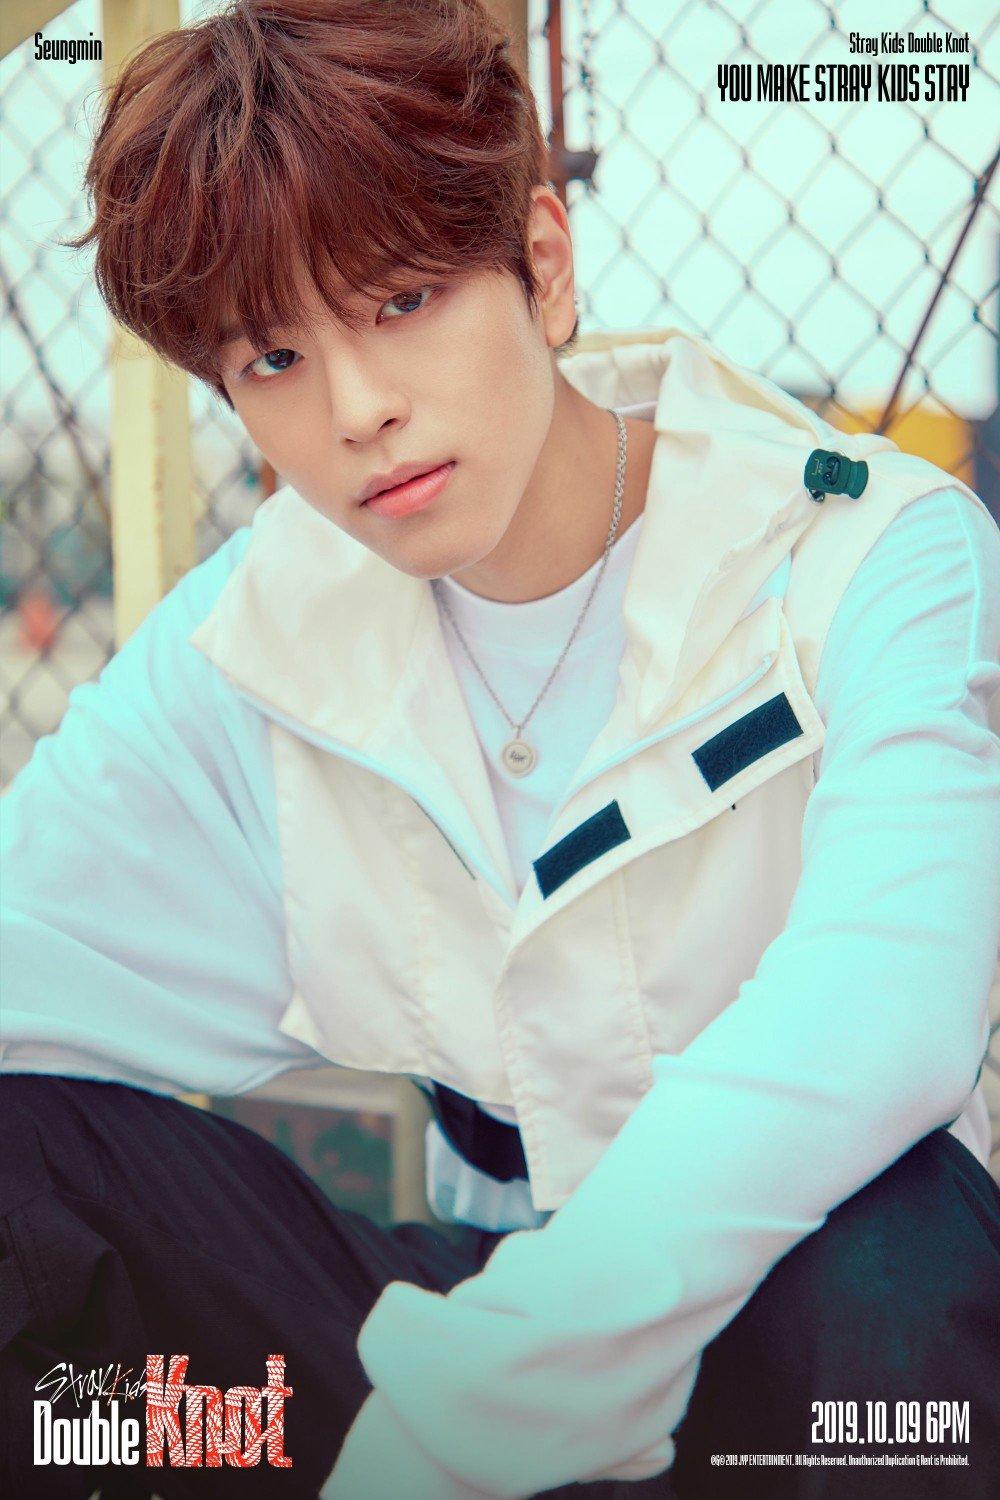 Stray Kids reveal individual teaser image for Seungmin, Hyunjin